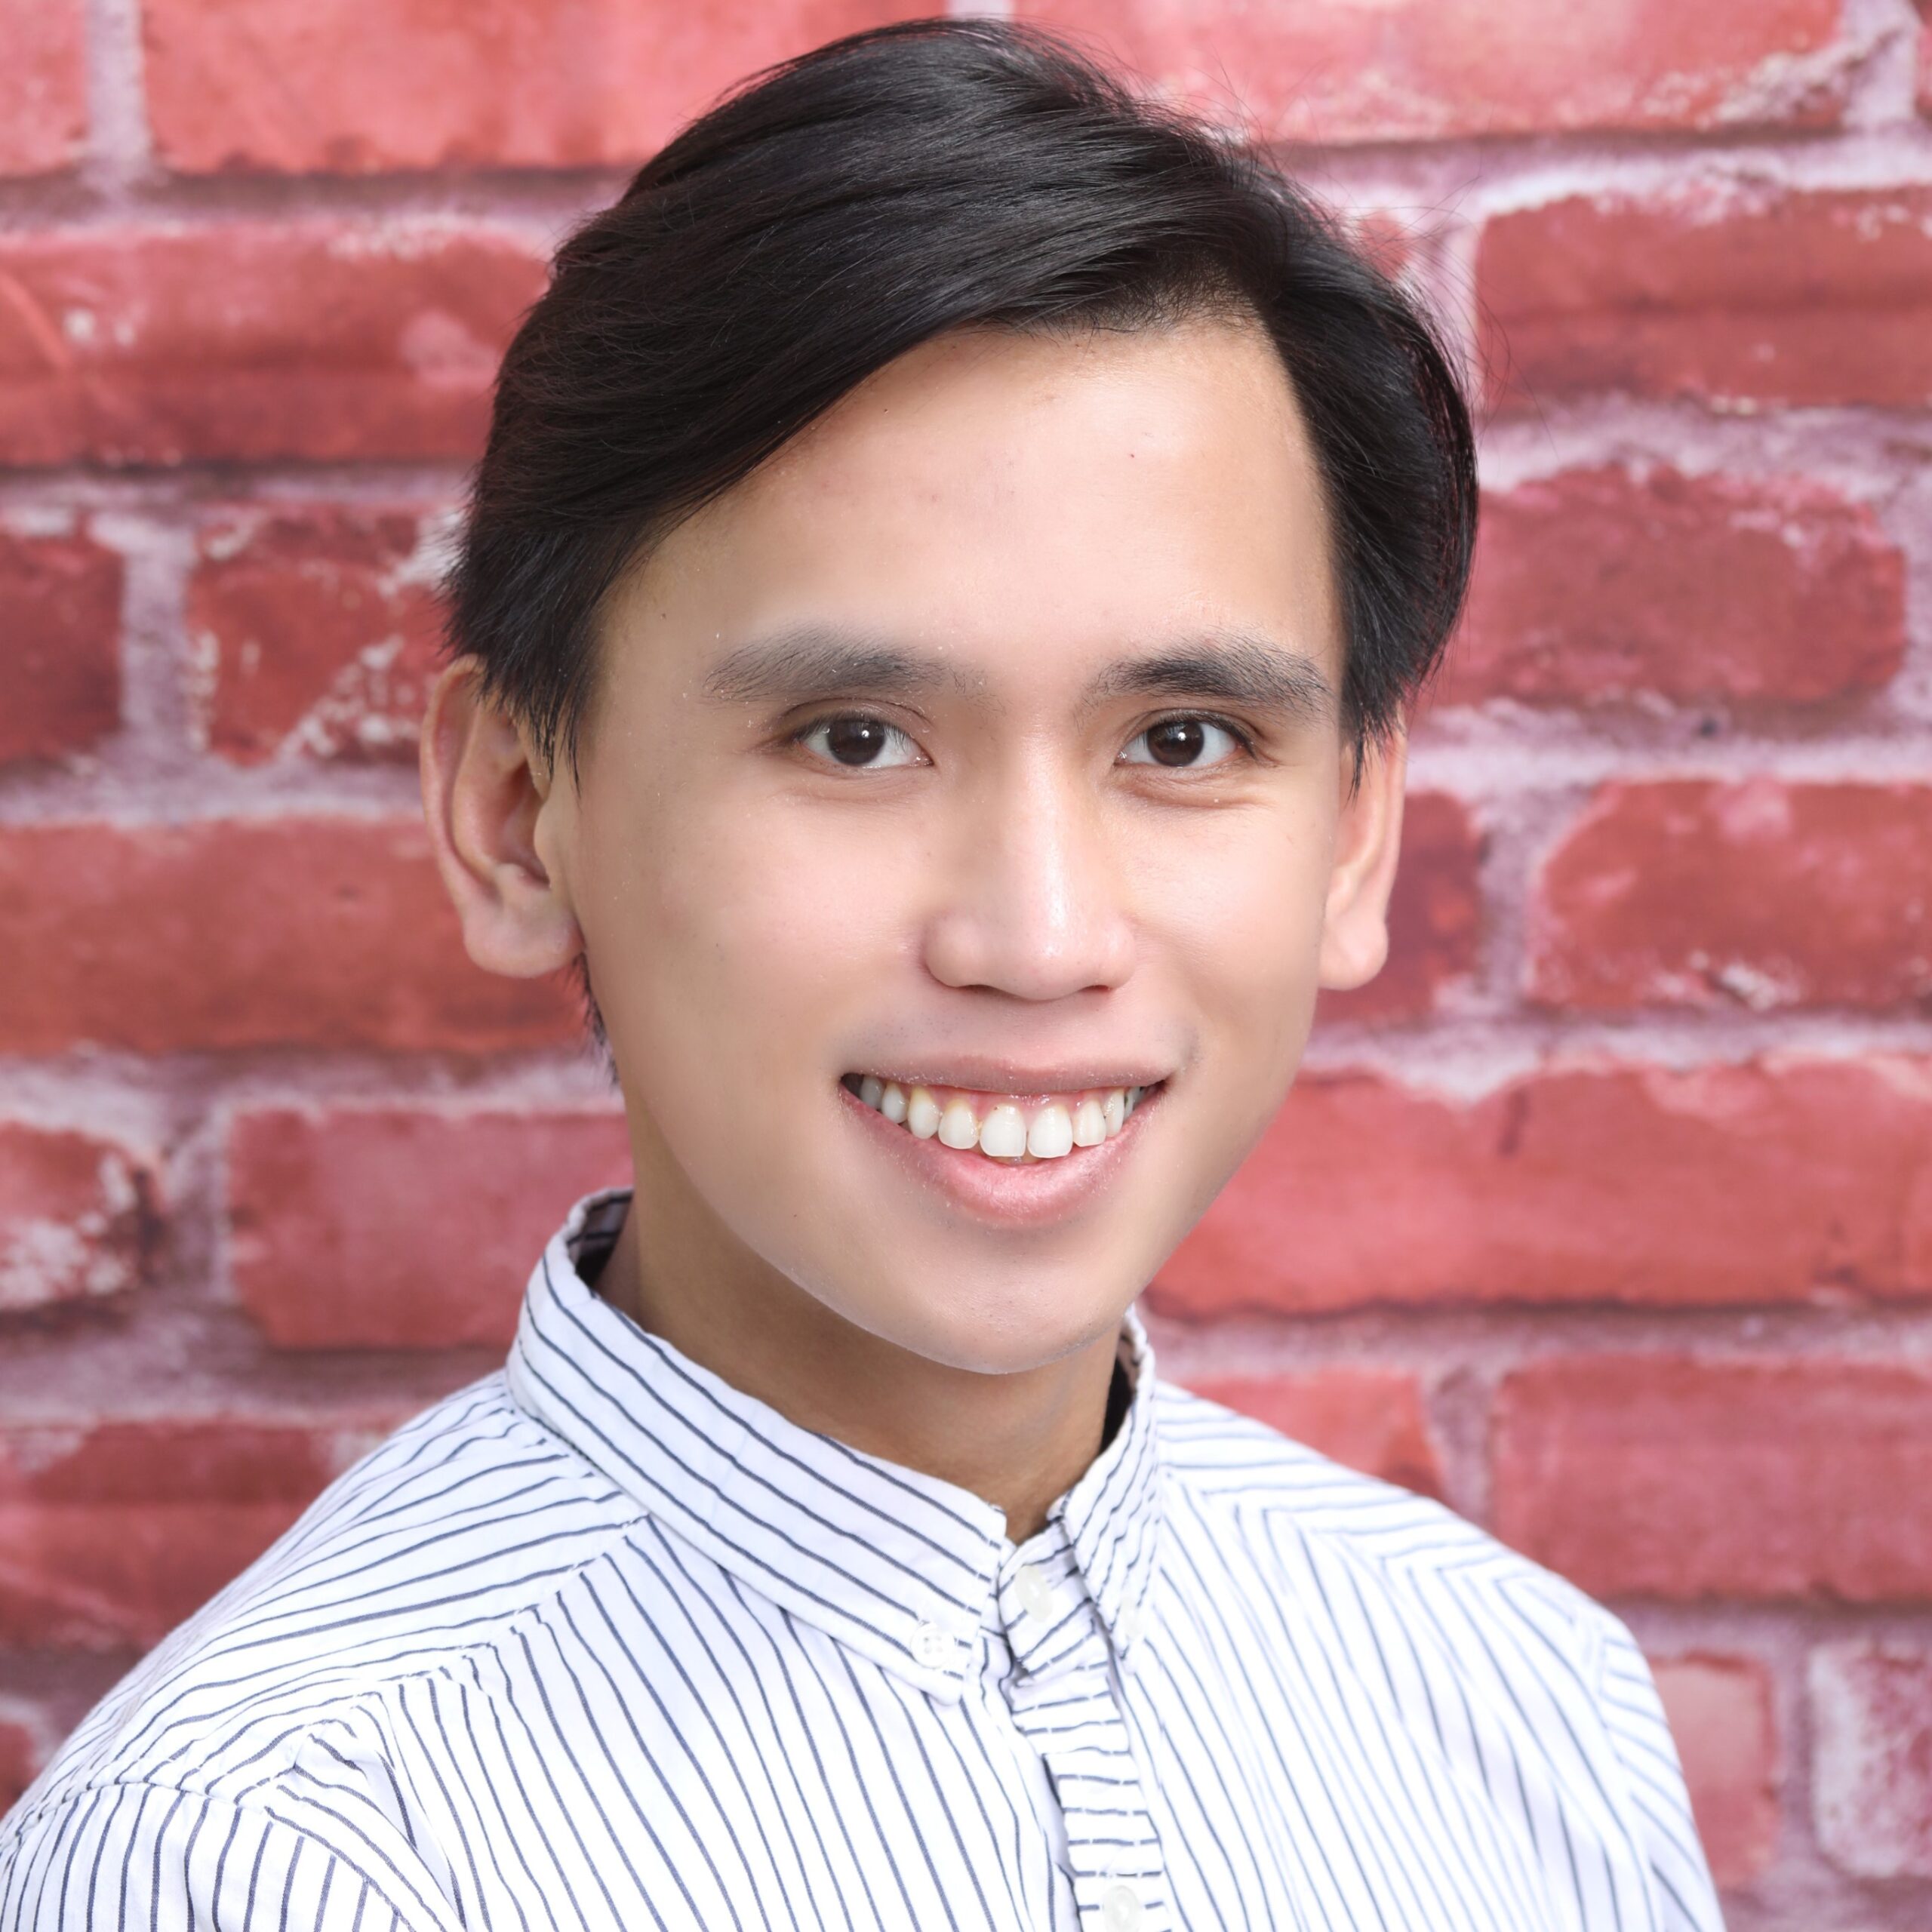 Headshot of Renzo, a Filipino man with short black hair and a white button-down with black pinstripes smiling at the camera in front of a red brick wall